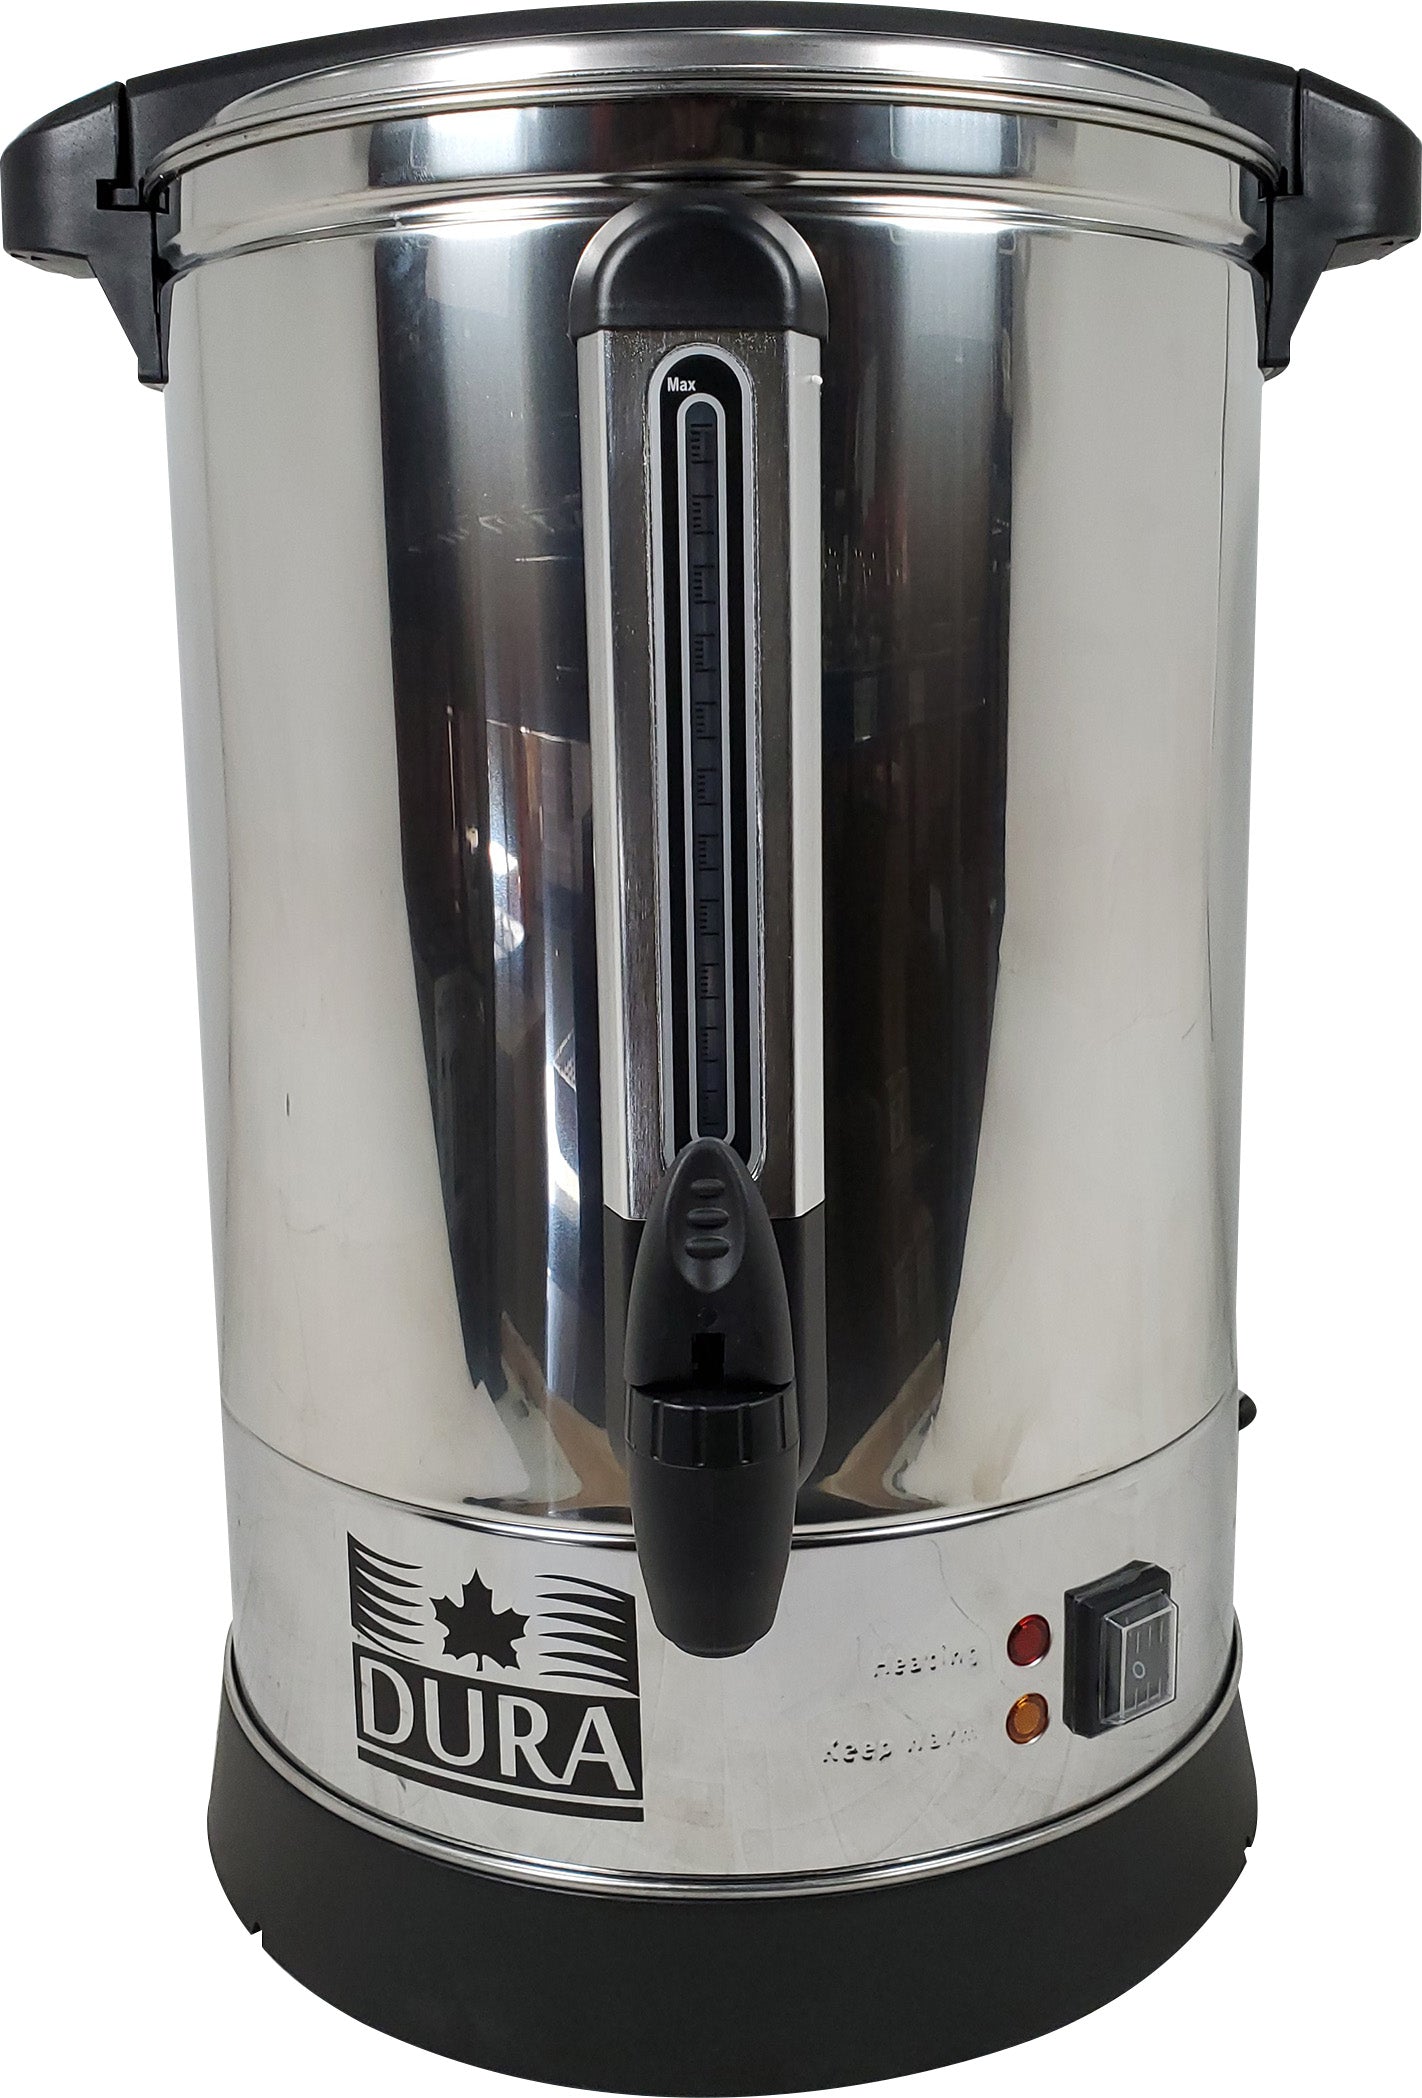 Buffet Server Catering Coffee Urn Stainless Steel Luxury Golden